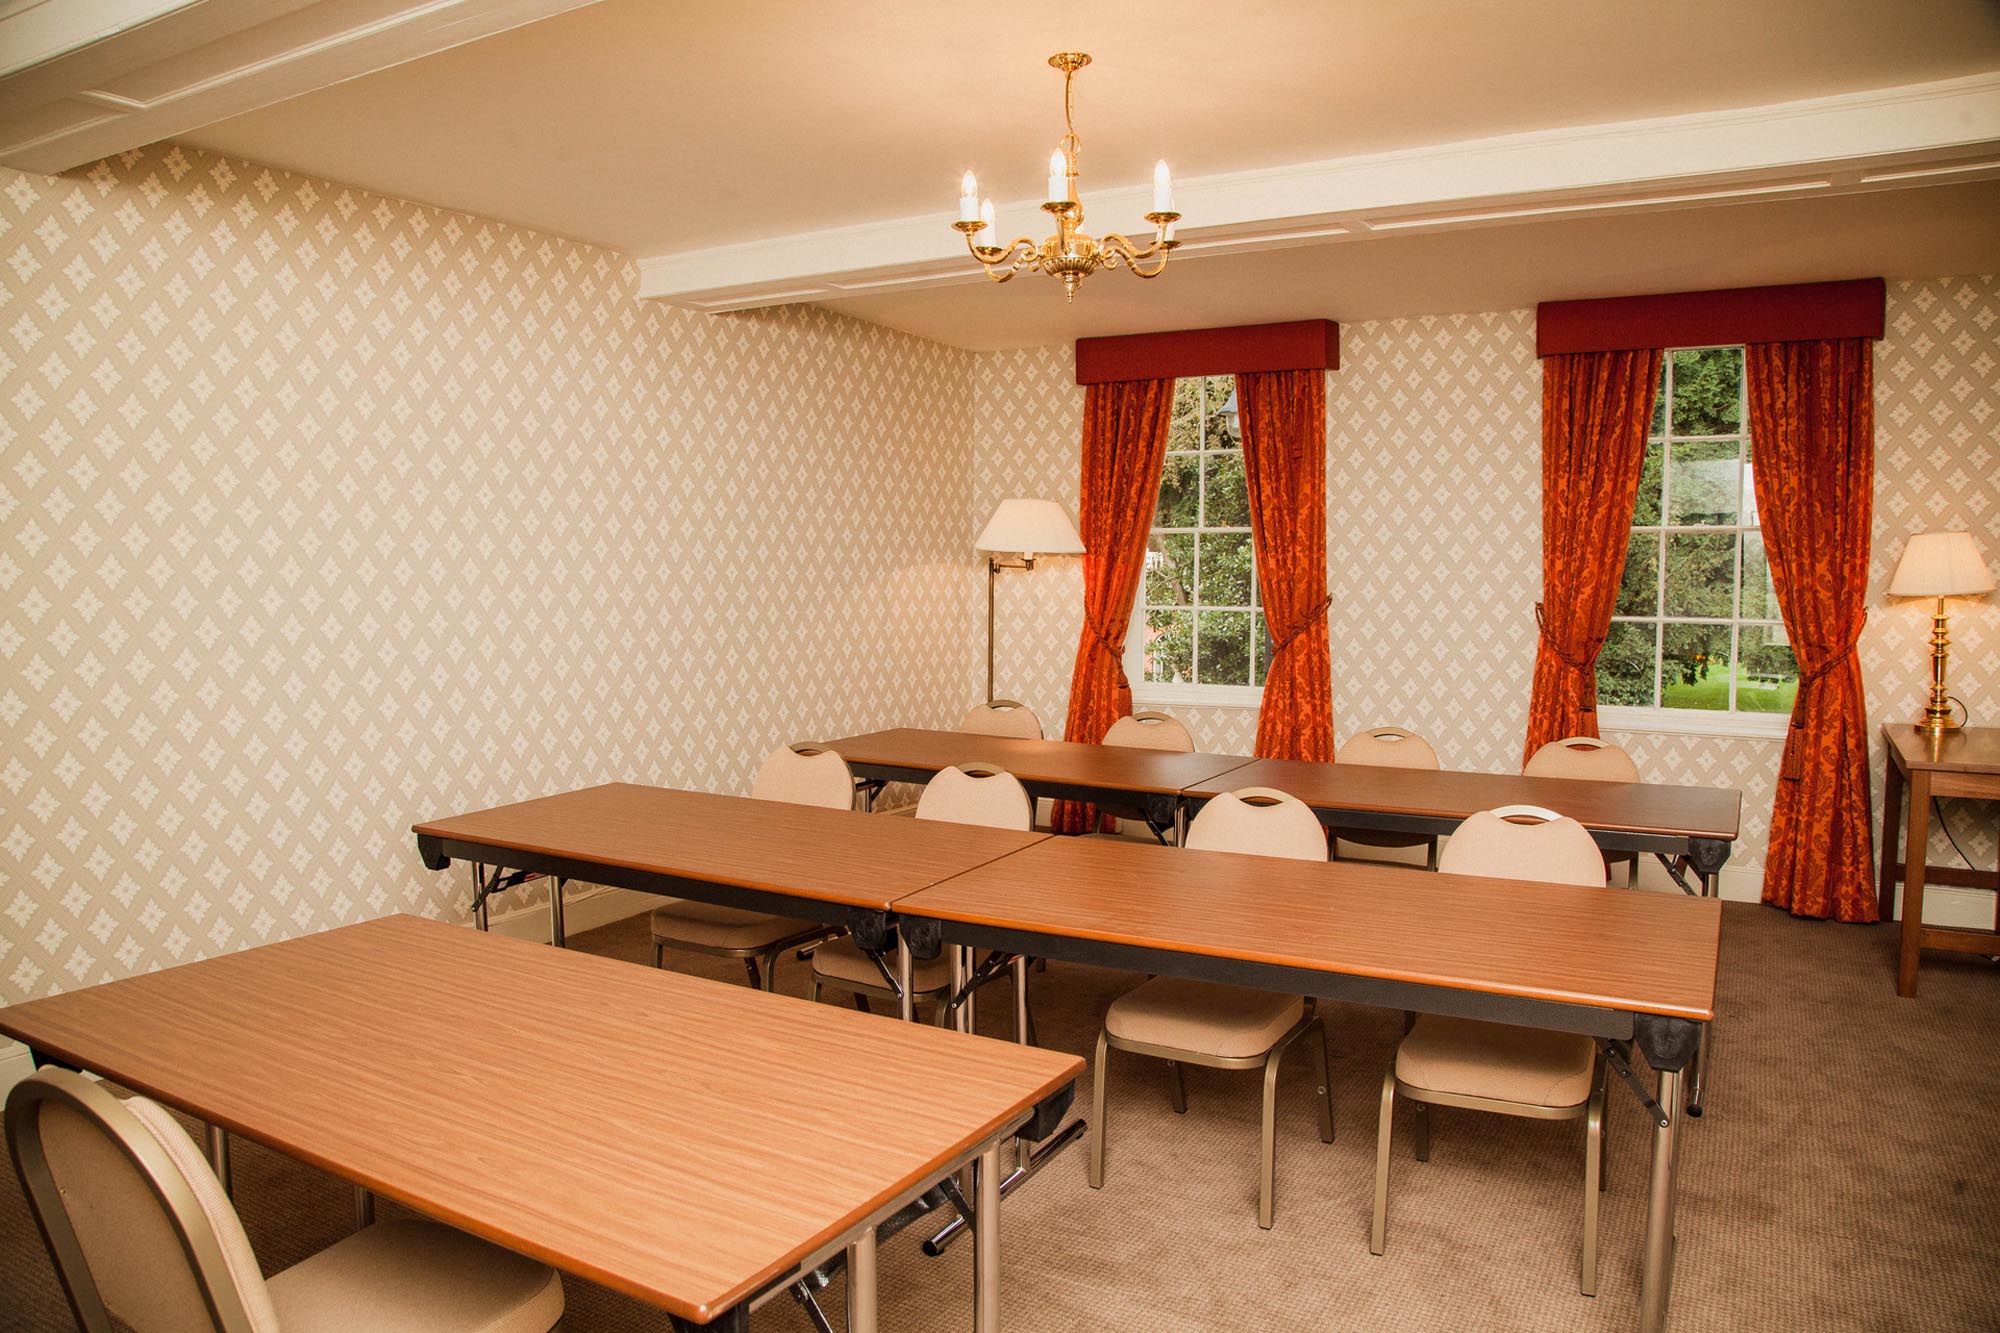 Meeting room at Belgrave Hall